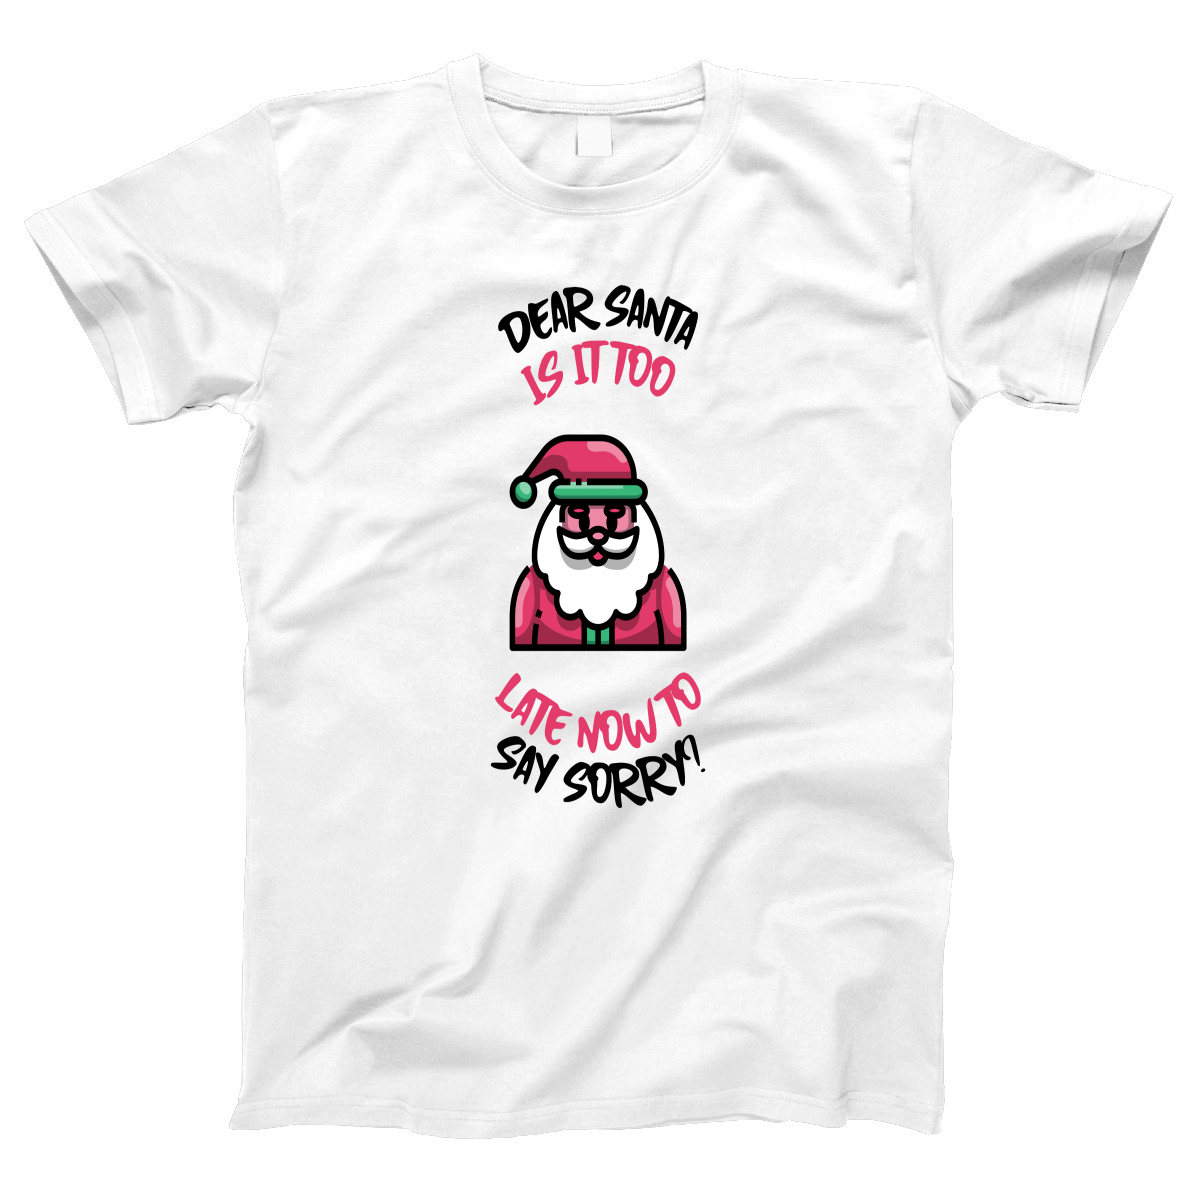 Dear Santa, Is It Too Late to Say Sorry? Women's T-shirt | White